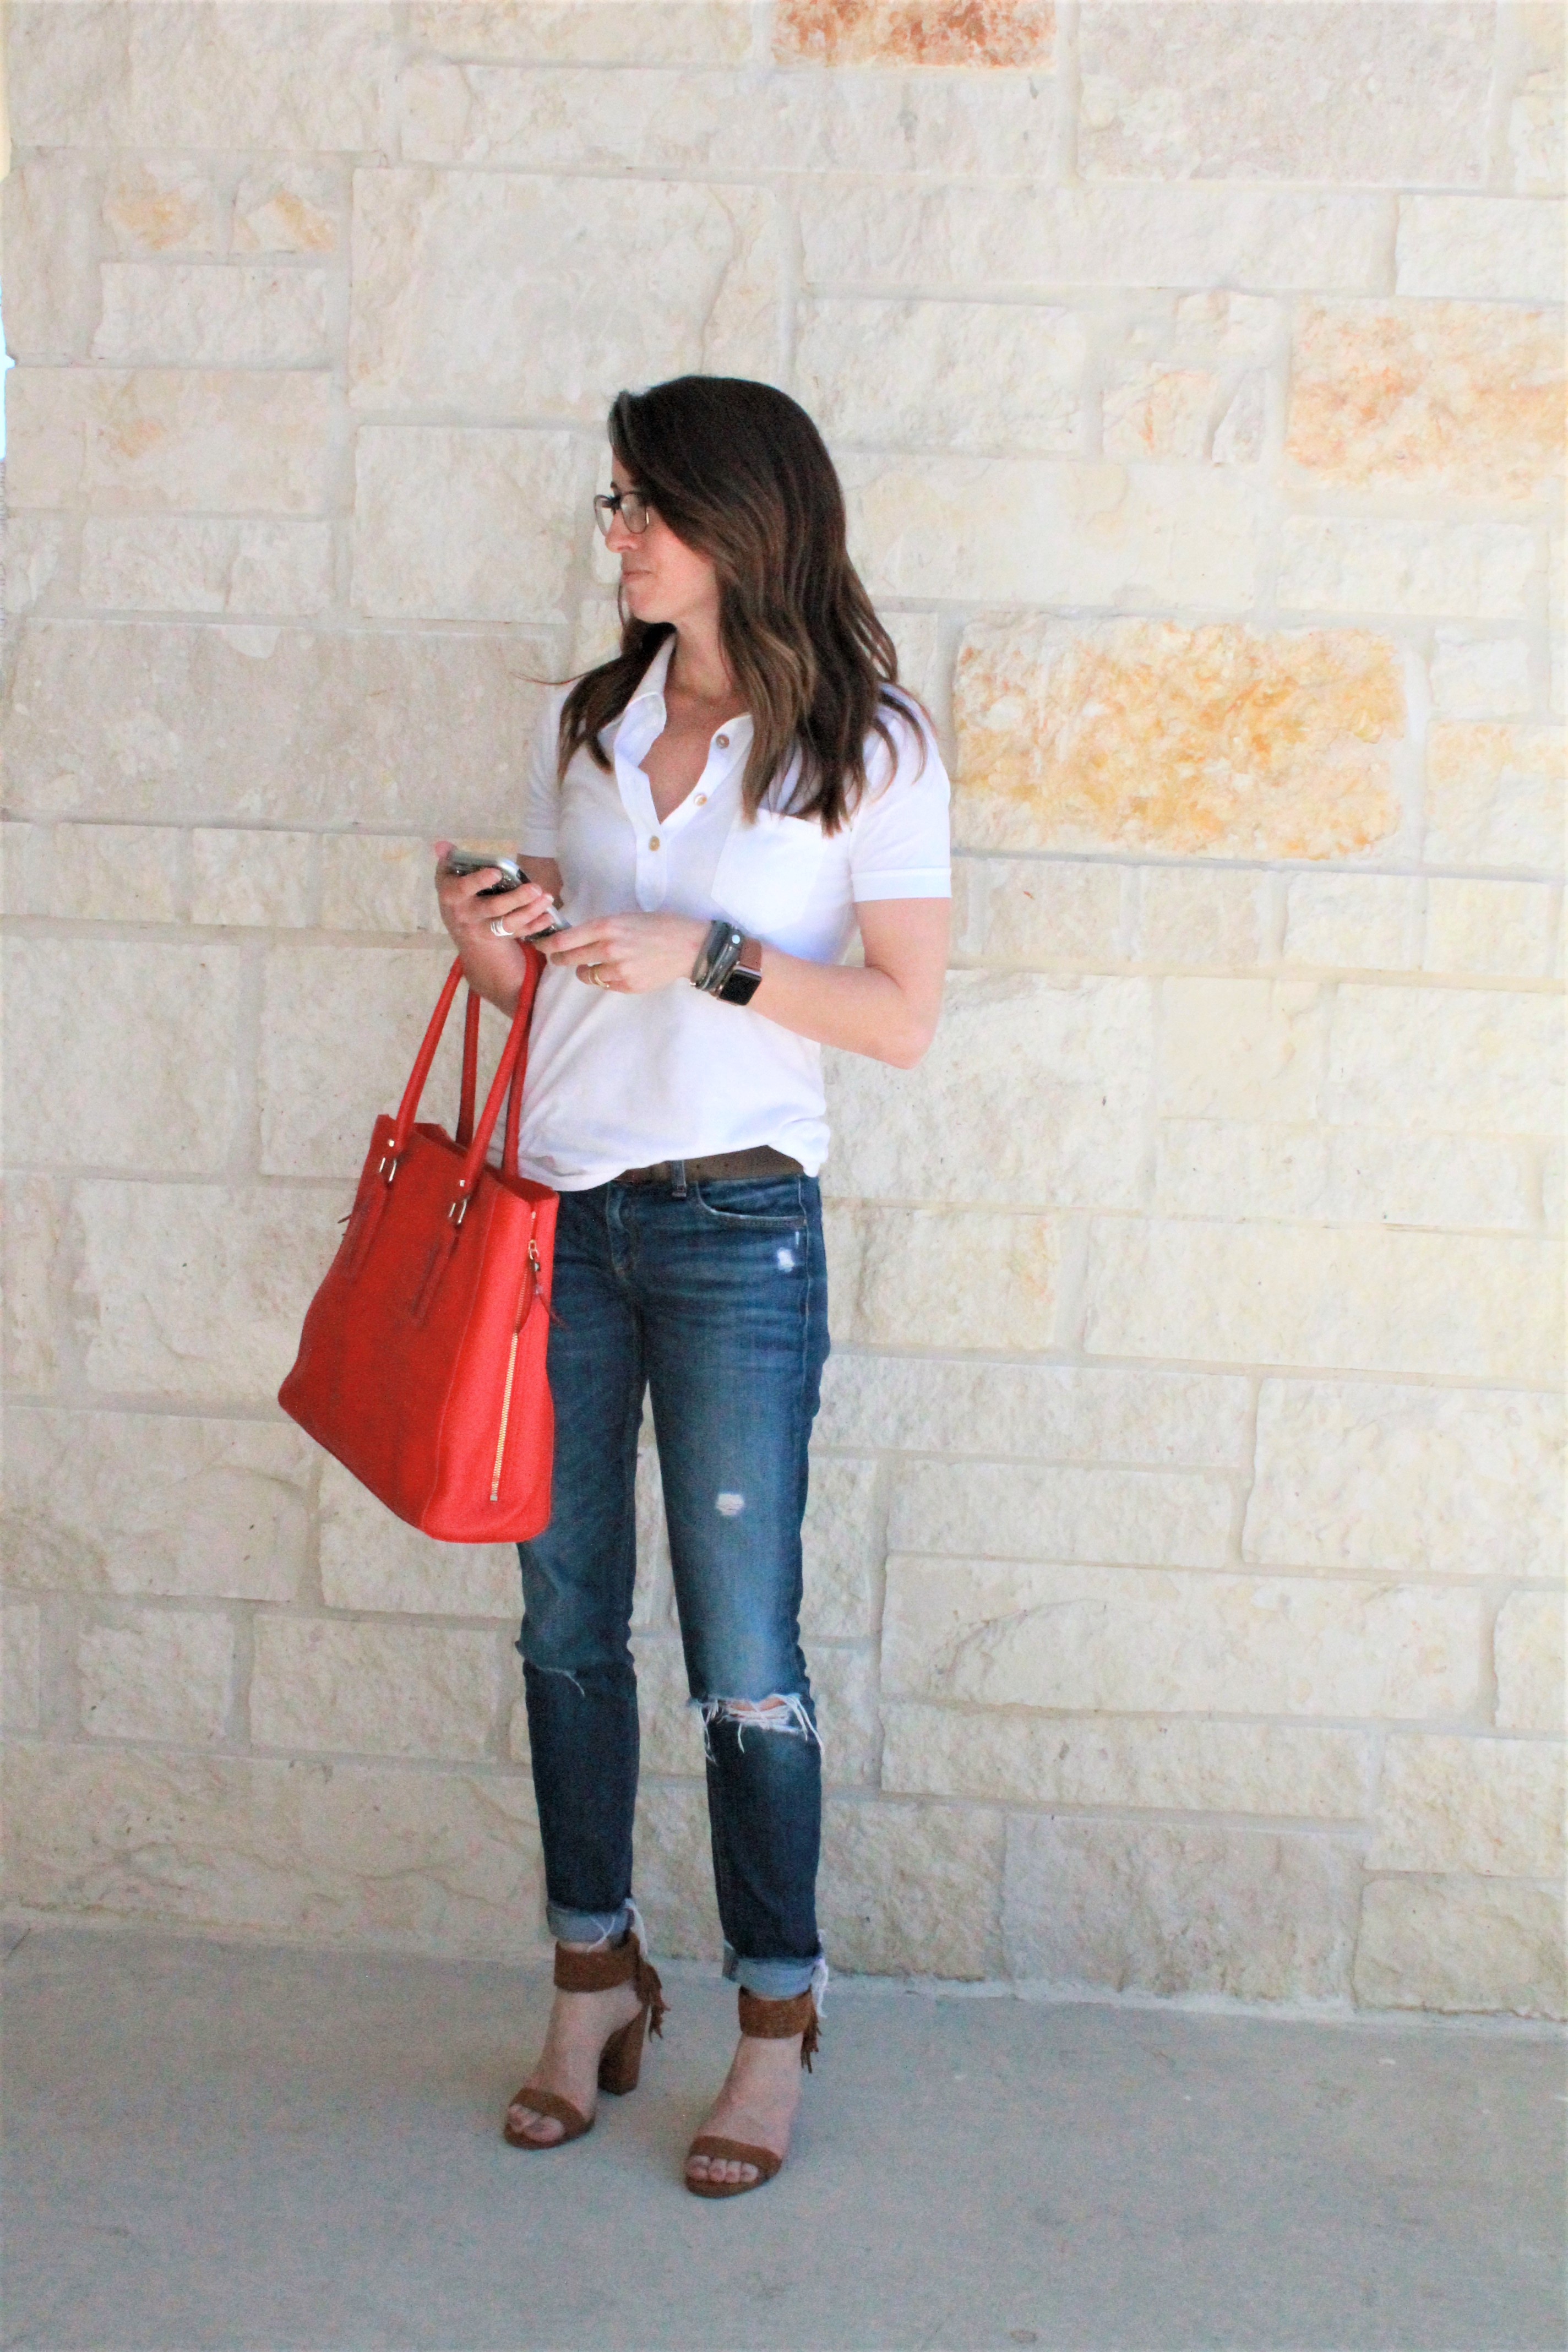 wardrobe stylist, personal stylist, method39, everyday street style, mom on the go, casual, classic, my style, red, white, blue, heels, today's look